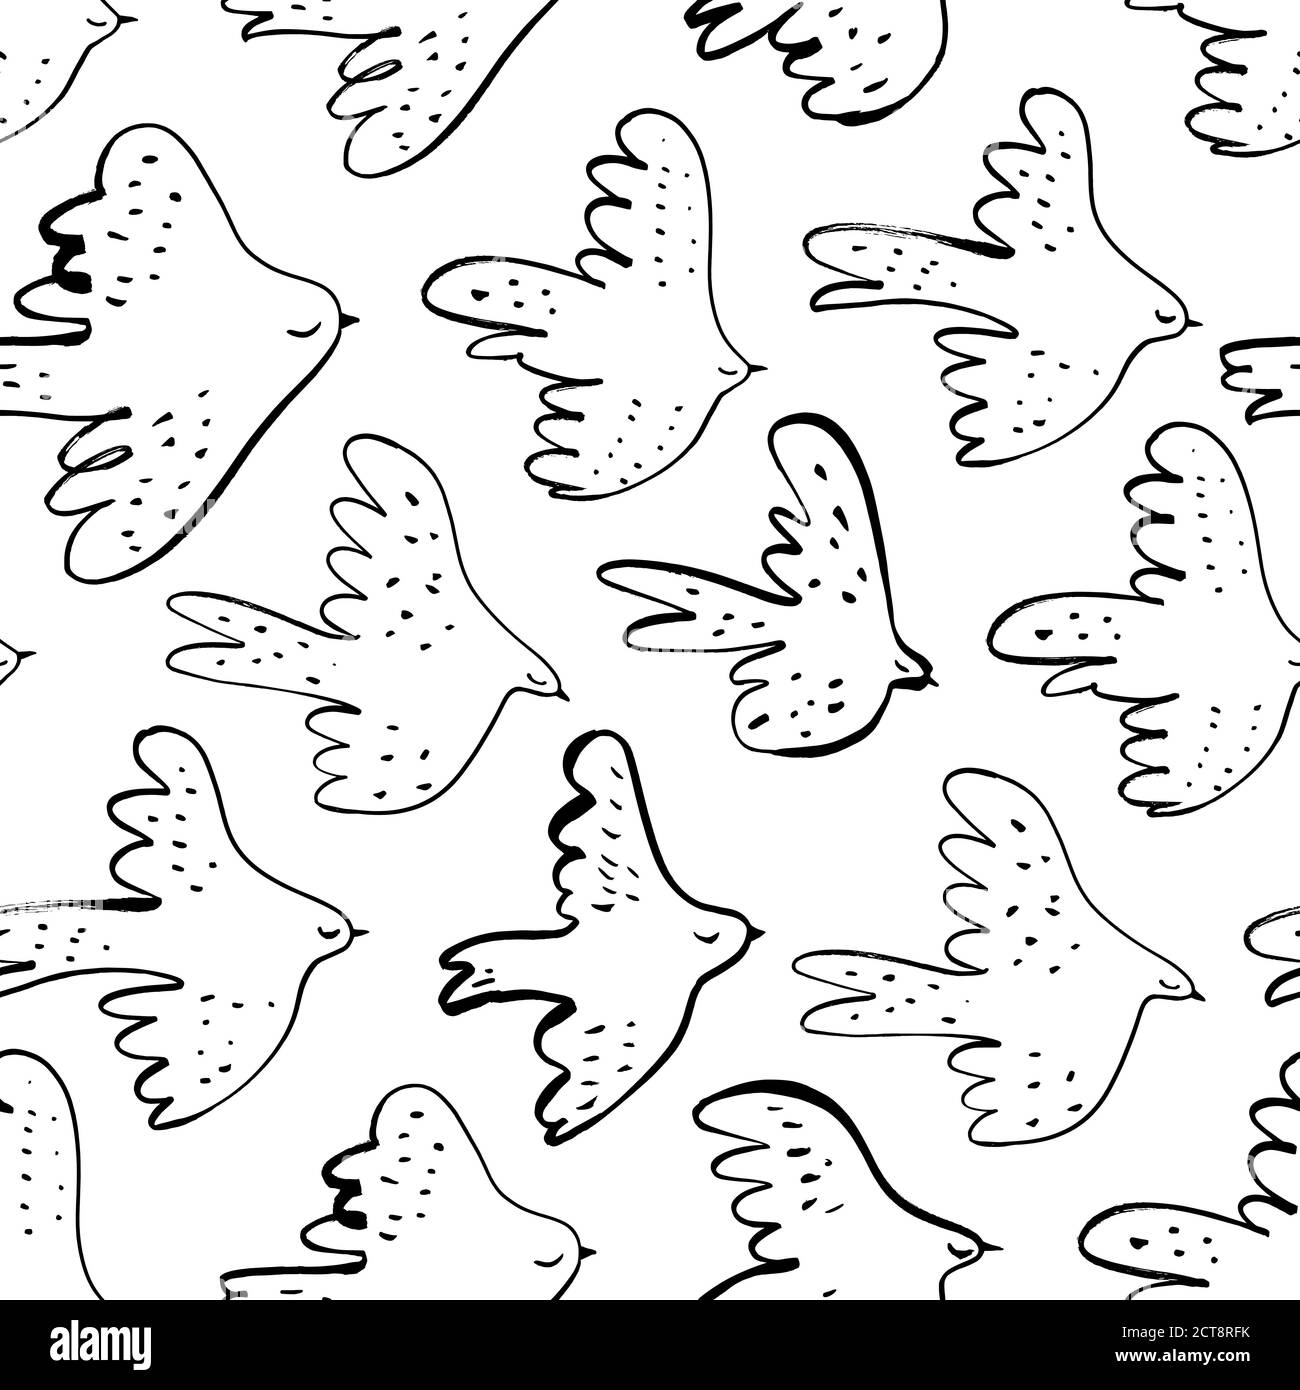 Seamless vector doodle pattern with black birds. Stock Vector